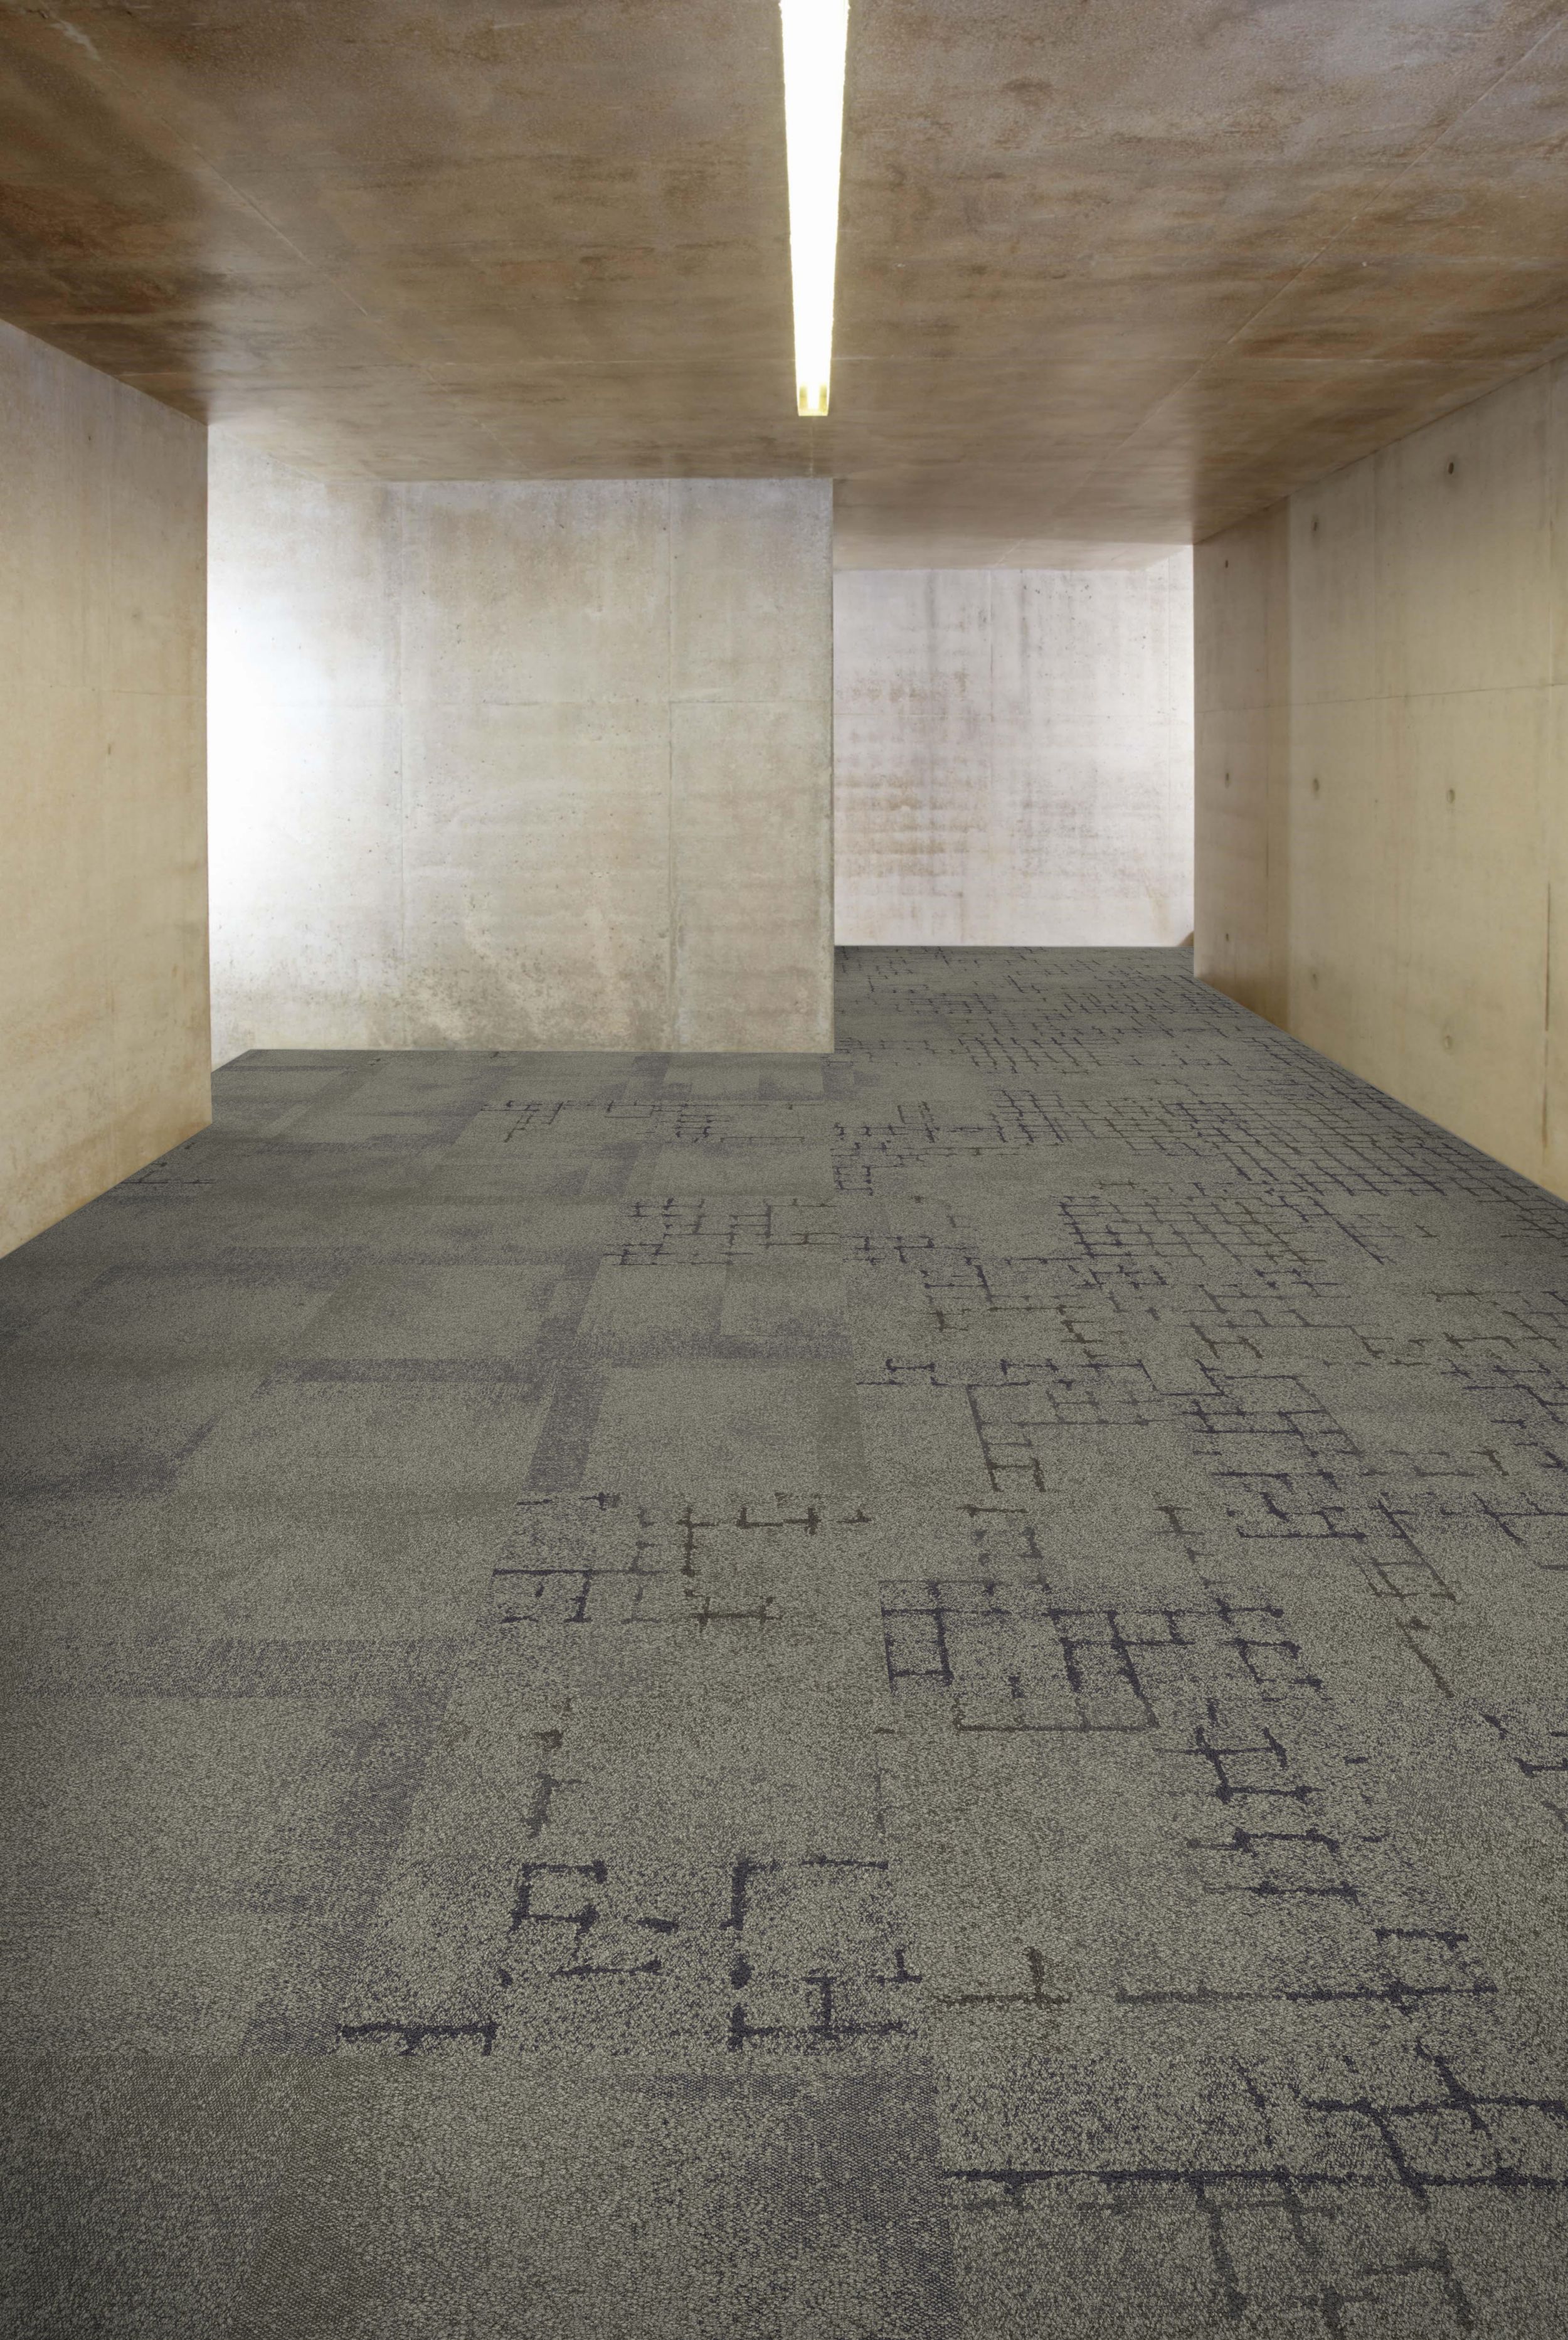 Interface Flagstone, Kerbstone and Sett in Stone carpet tile in corridor with concrete walls and ceiling imagen número 6